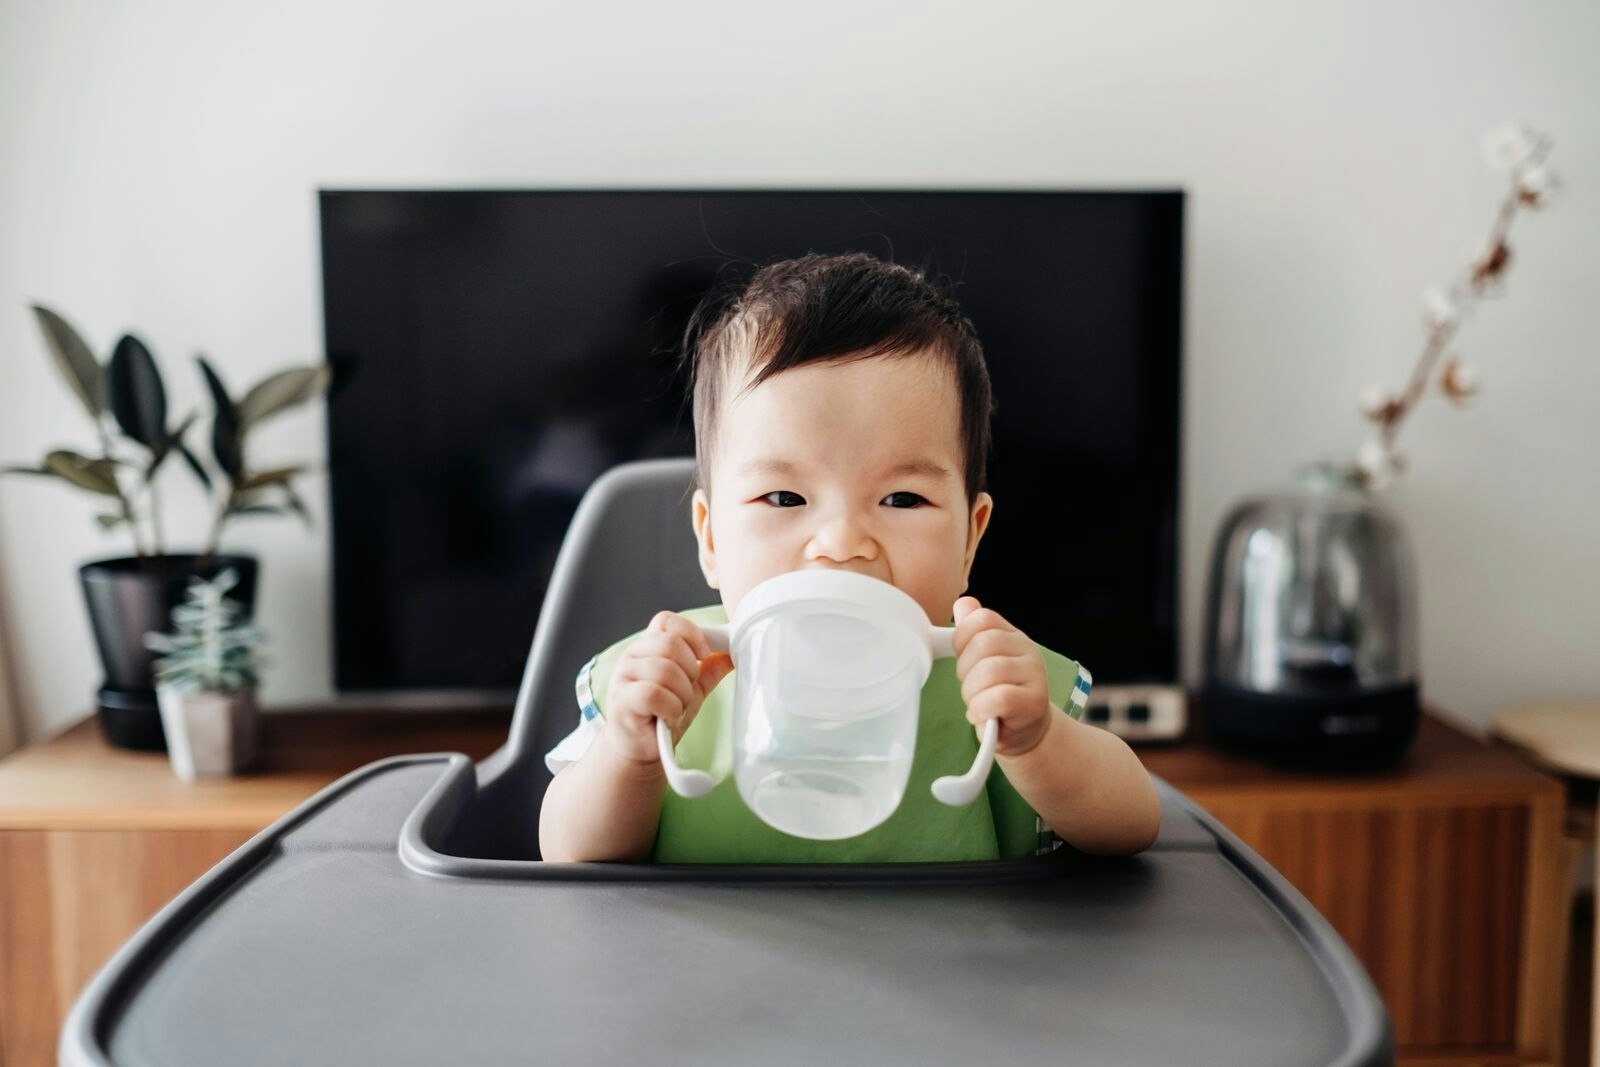 Baby Drinking Water from Sip Cup